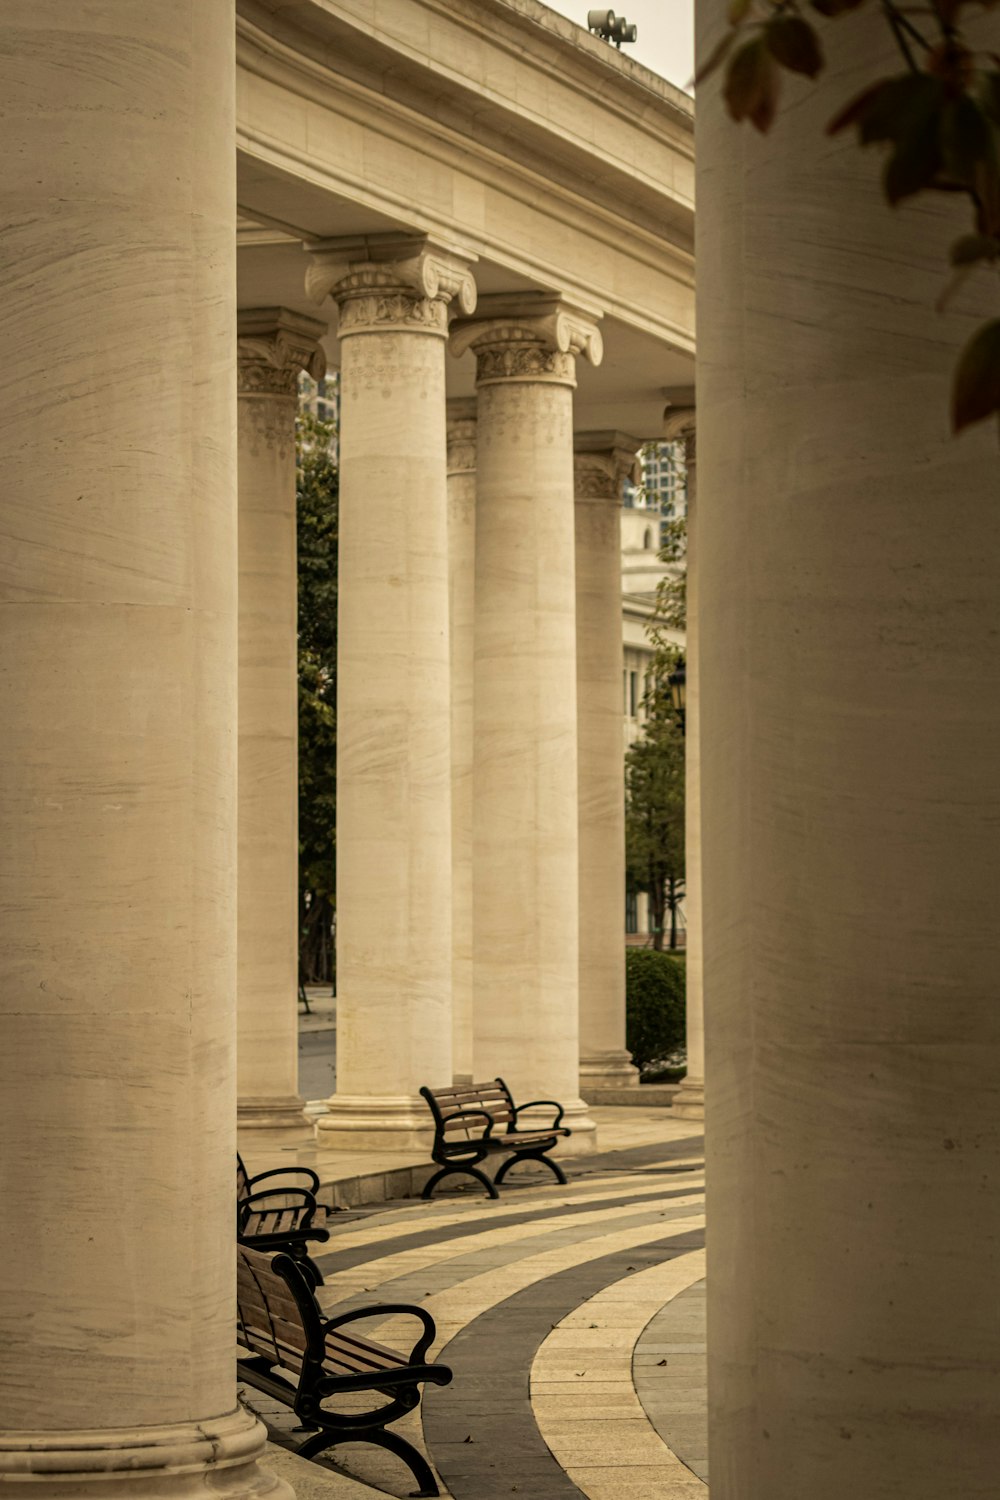 a couple of benches sitting next to tall pillars